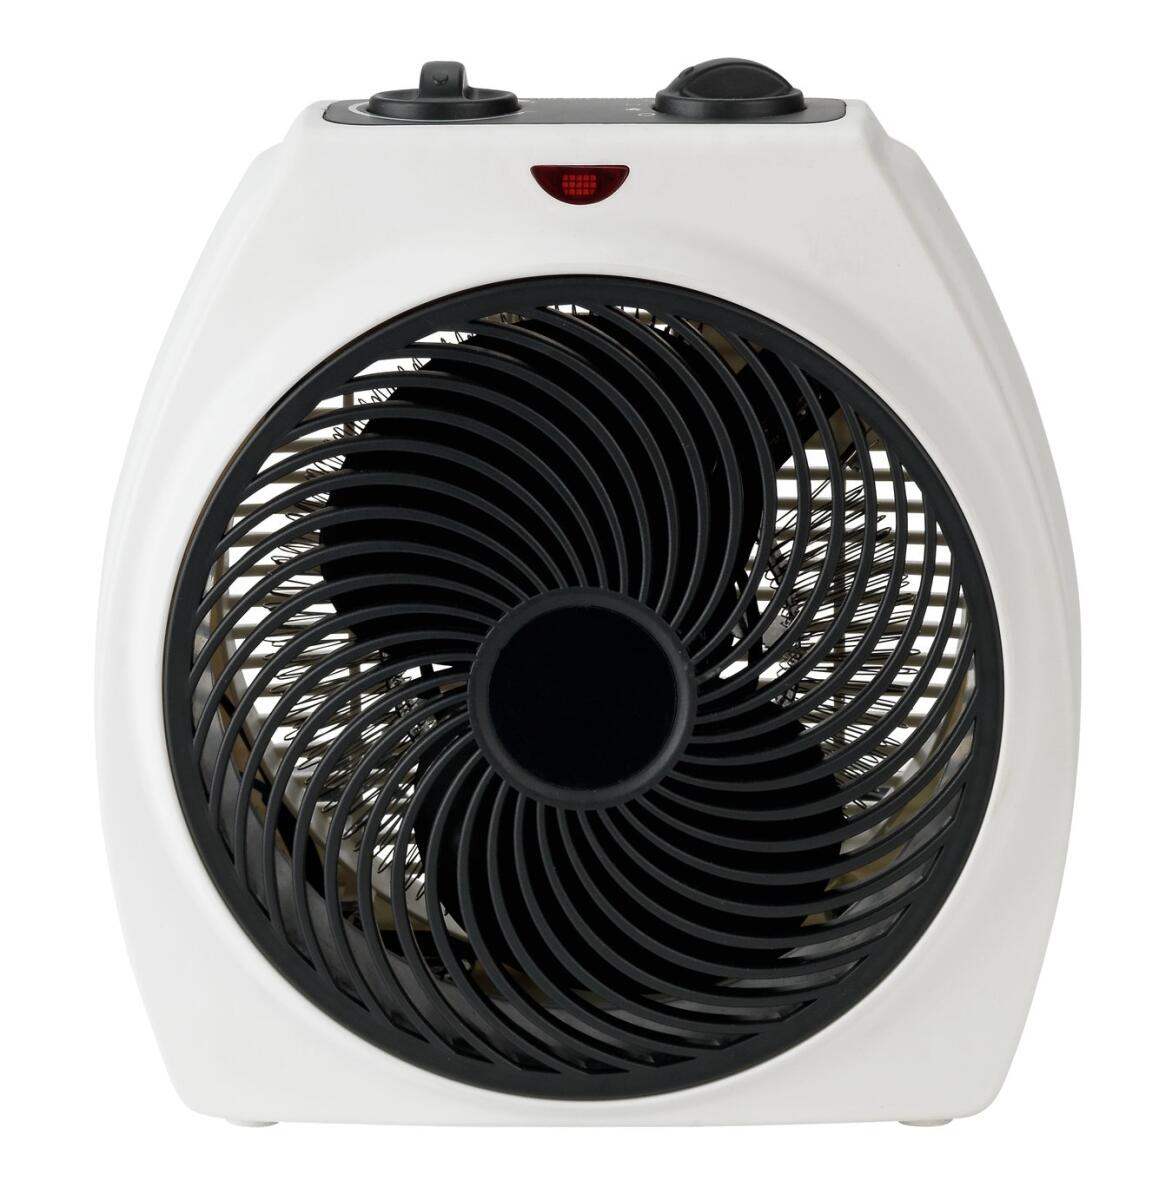 Simple Value 2kw Upright Fan Heater 499 Argos Hotukdeals pertaining to proportions 1172 X 1200